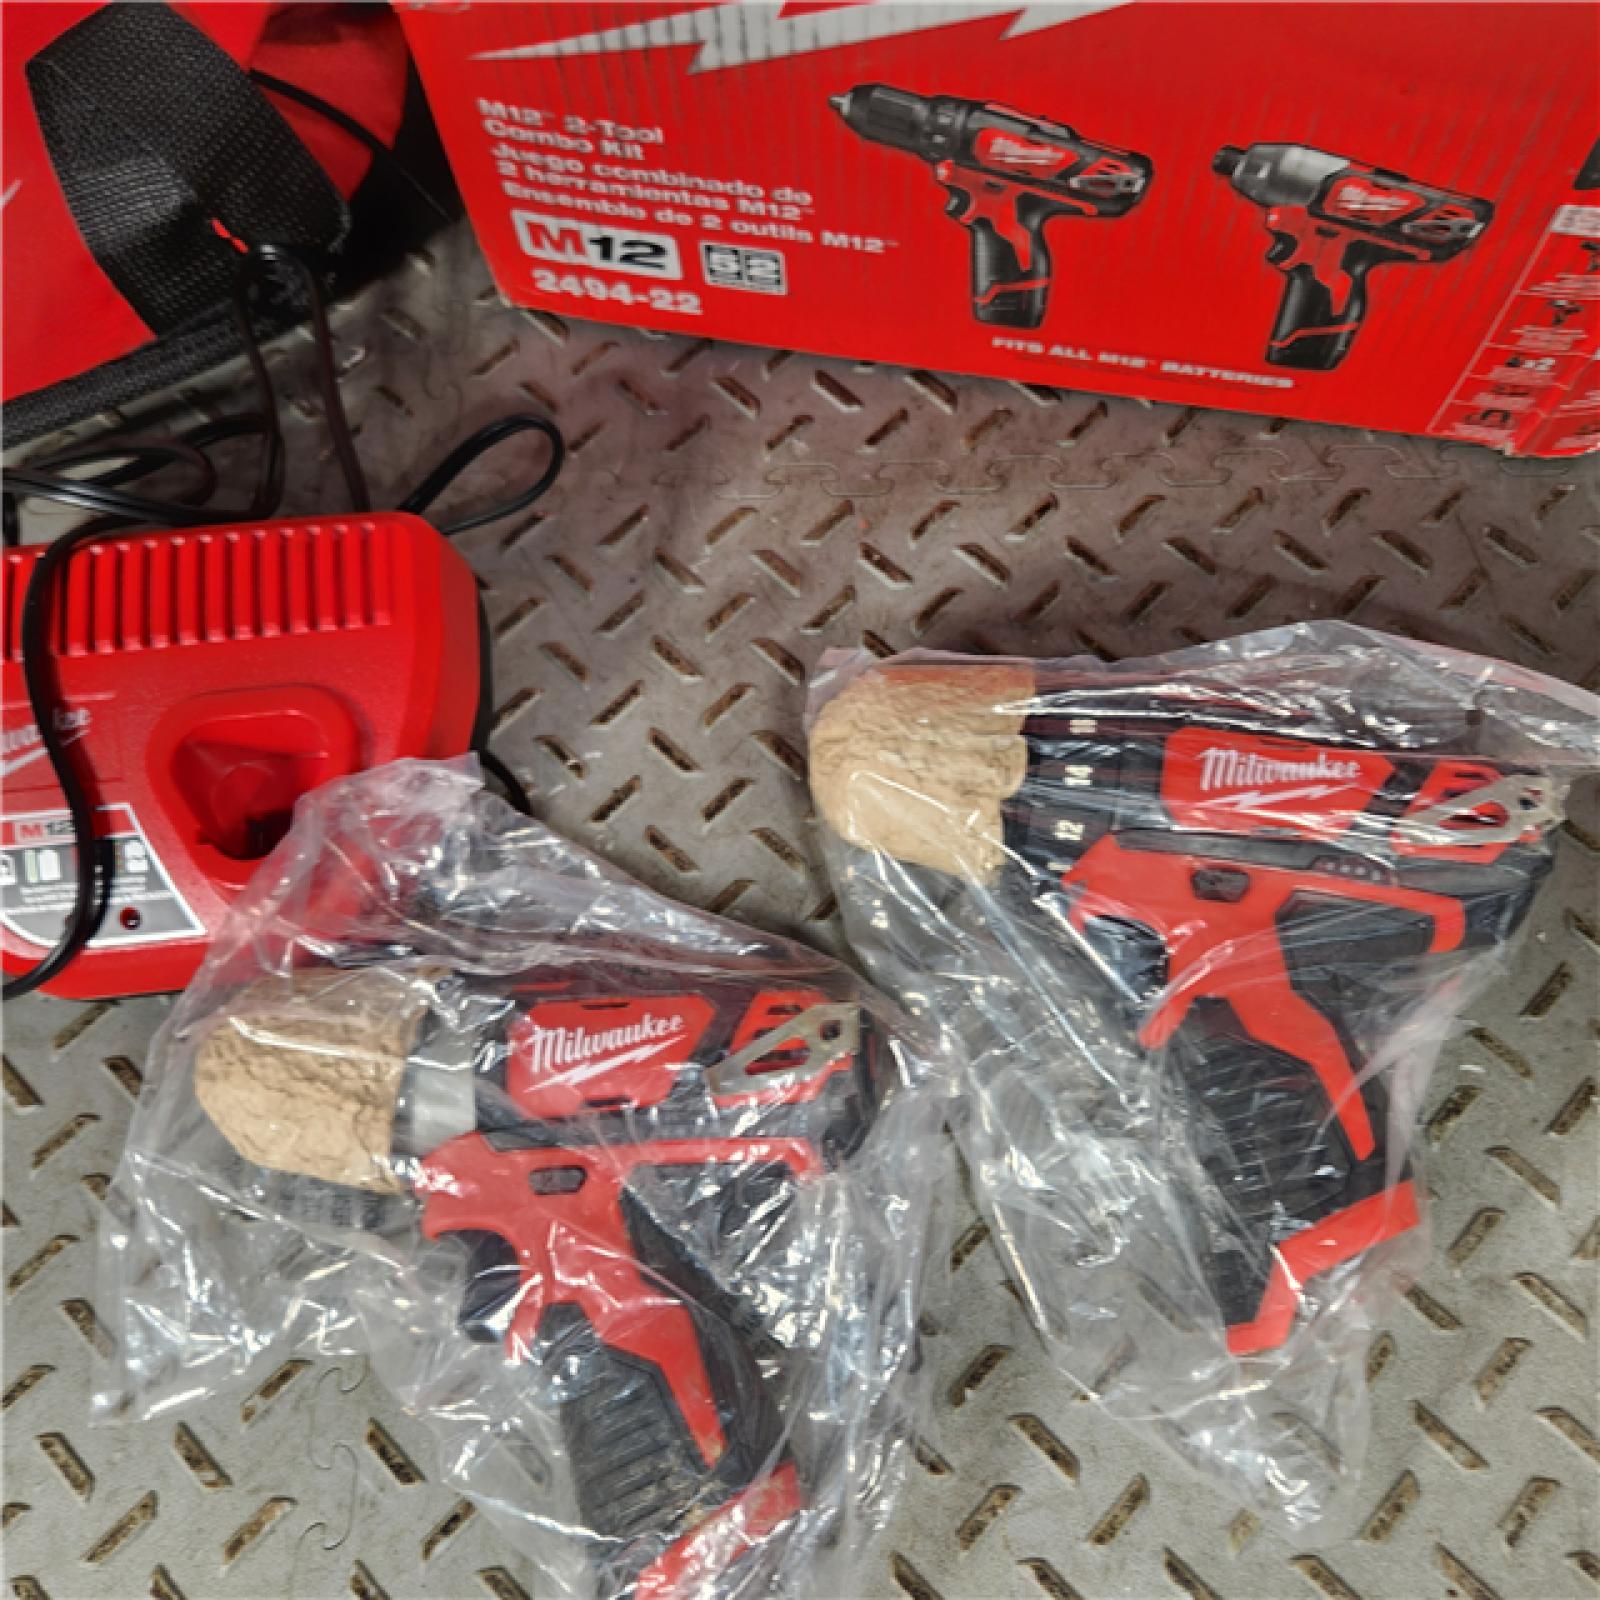 Houston Location - AS-IS Milwaukee 2-Tool M12 12V Lithium-Ion Drill/Driver & Impact Driver Cordless Tool Combo Kit - Appears IN NEW Condition